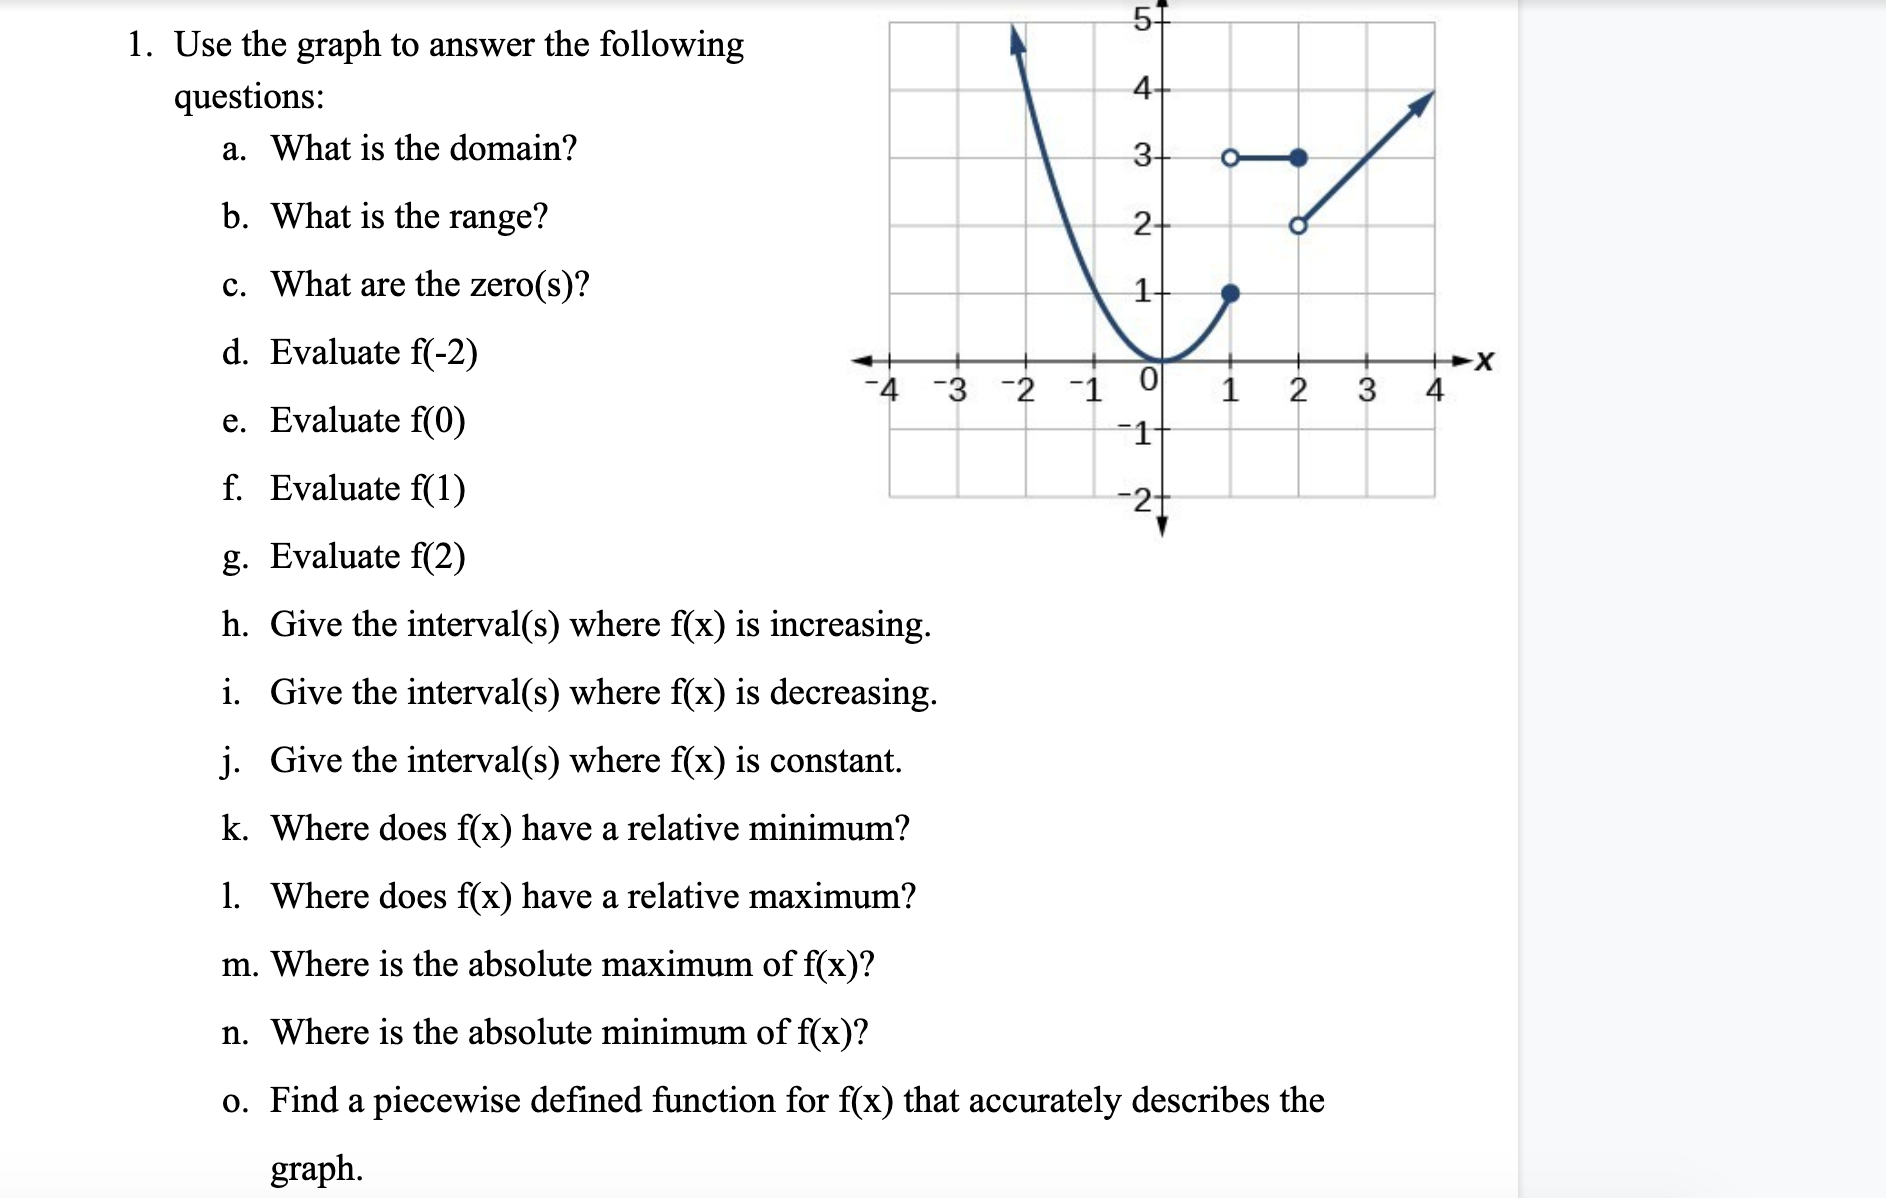 5+
1. Use the graph to answer the following
questions:
4+
a. What is the domain?
3-
b. What is the range?
2-
c. What are the zero(s)?
1-
d. Evaluate f(-2)
-4 -3 -2 1
1
2
3
4
e. Evaluate f(0)
-1
f. Evaluate f(1)
-2-
g. Evaluate f(2)
h. Give the interval(s) where f(x) is increasing.
i. Give the interval(s) where f(x) is decreasing.
j. Give the interval(s) where f(x) is constant.
k. Where does f(x) have a relative minimum?
1. Where does f(x) have a relative maximum?
m. Where is the absolute maximum of f(x)?
n. Where is the absolute minimum of f(x)?
o. Find a piecewise defined function for f(x) that accurately describes the
graph.
